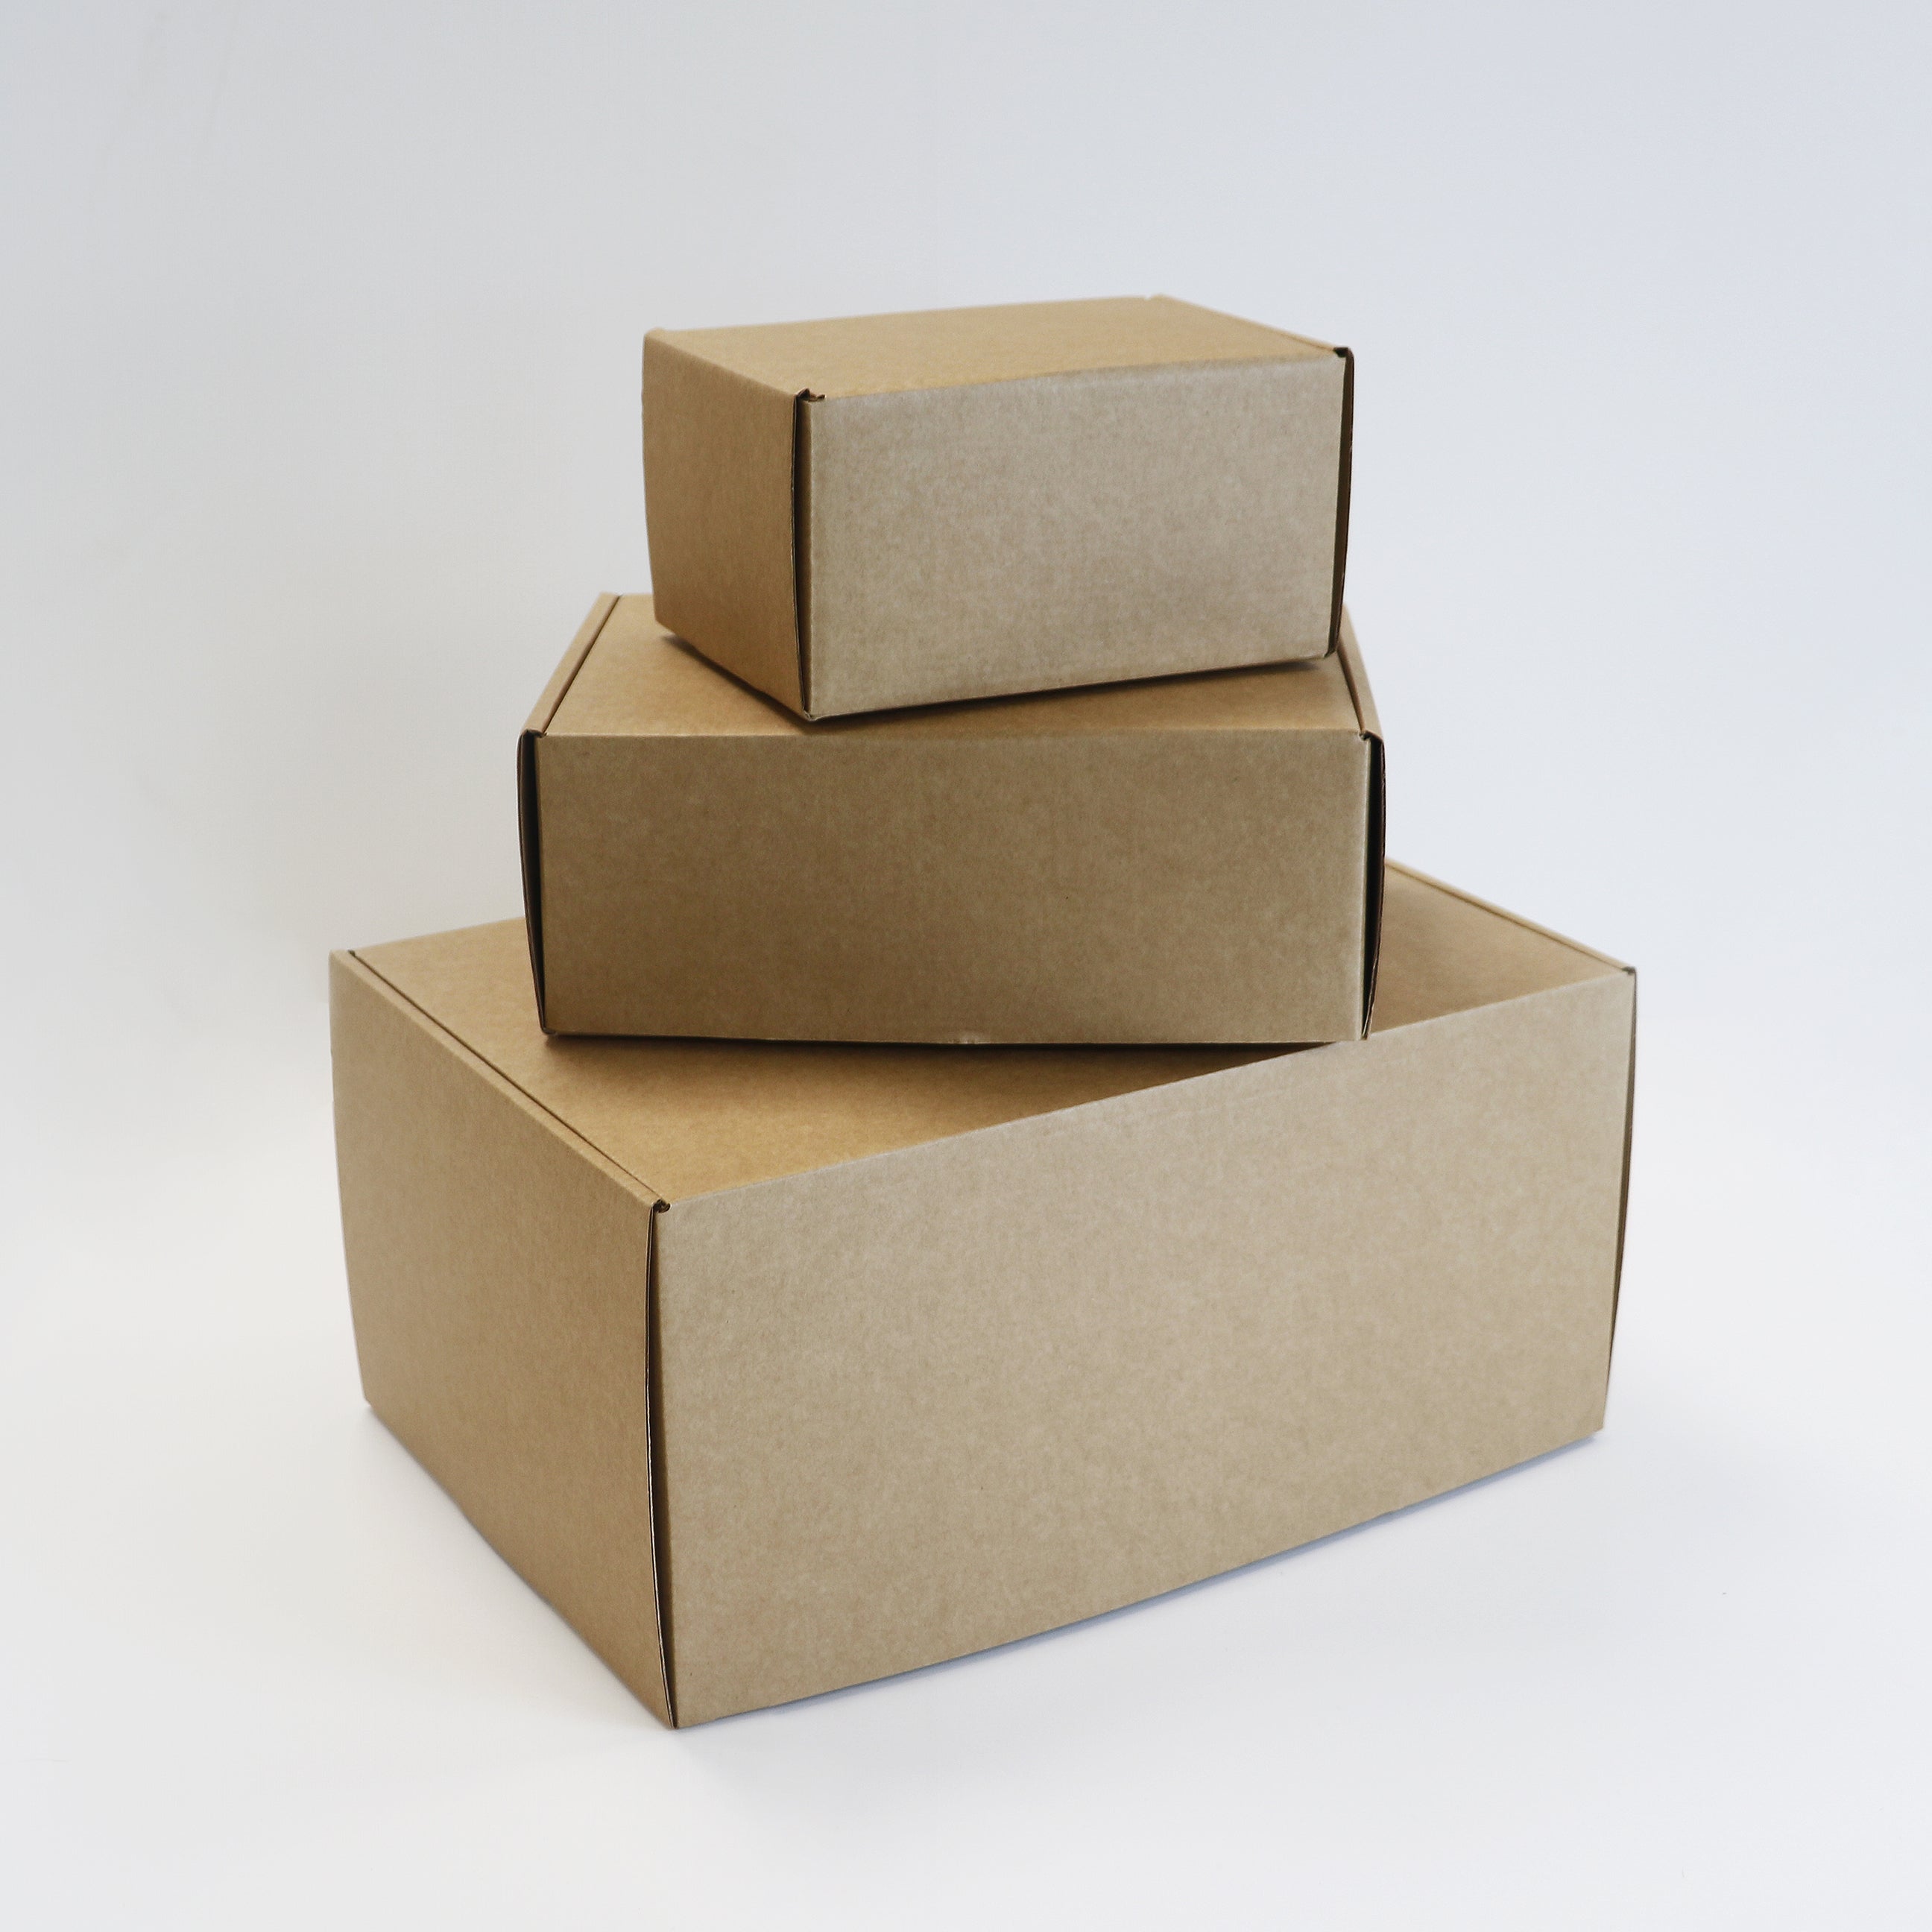 Plain Range Delivery Boxes, Small 150mm x 110mm x 85mm (Pk of 5)